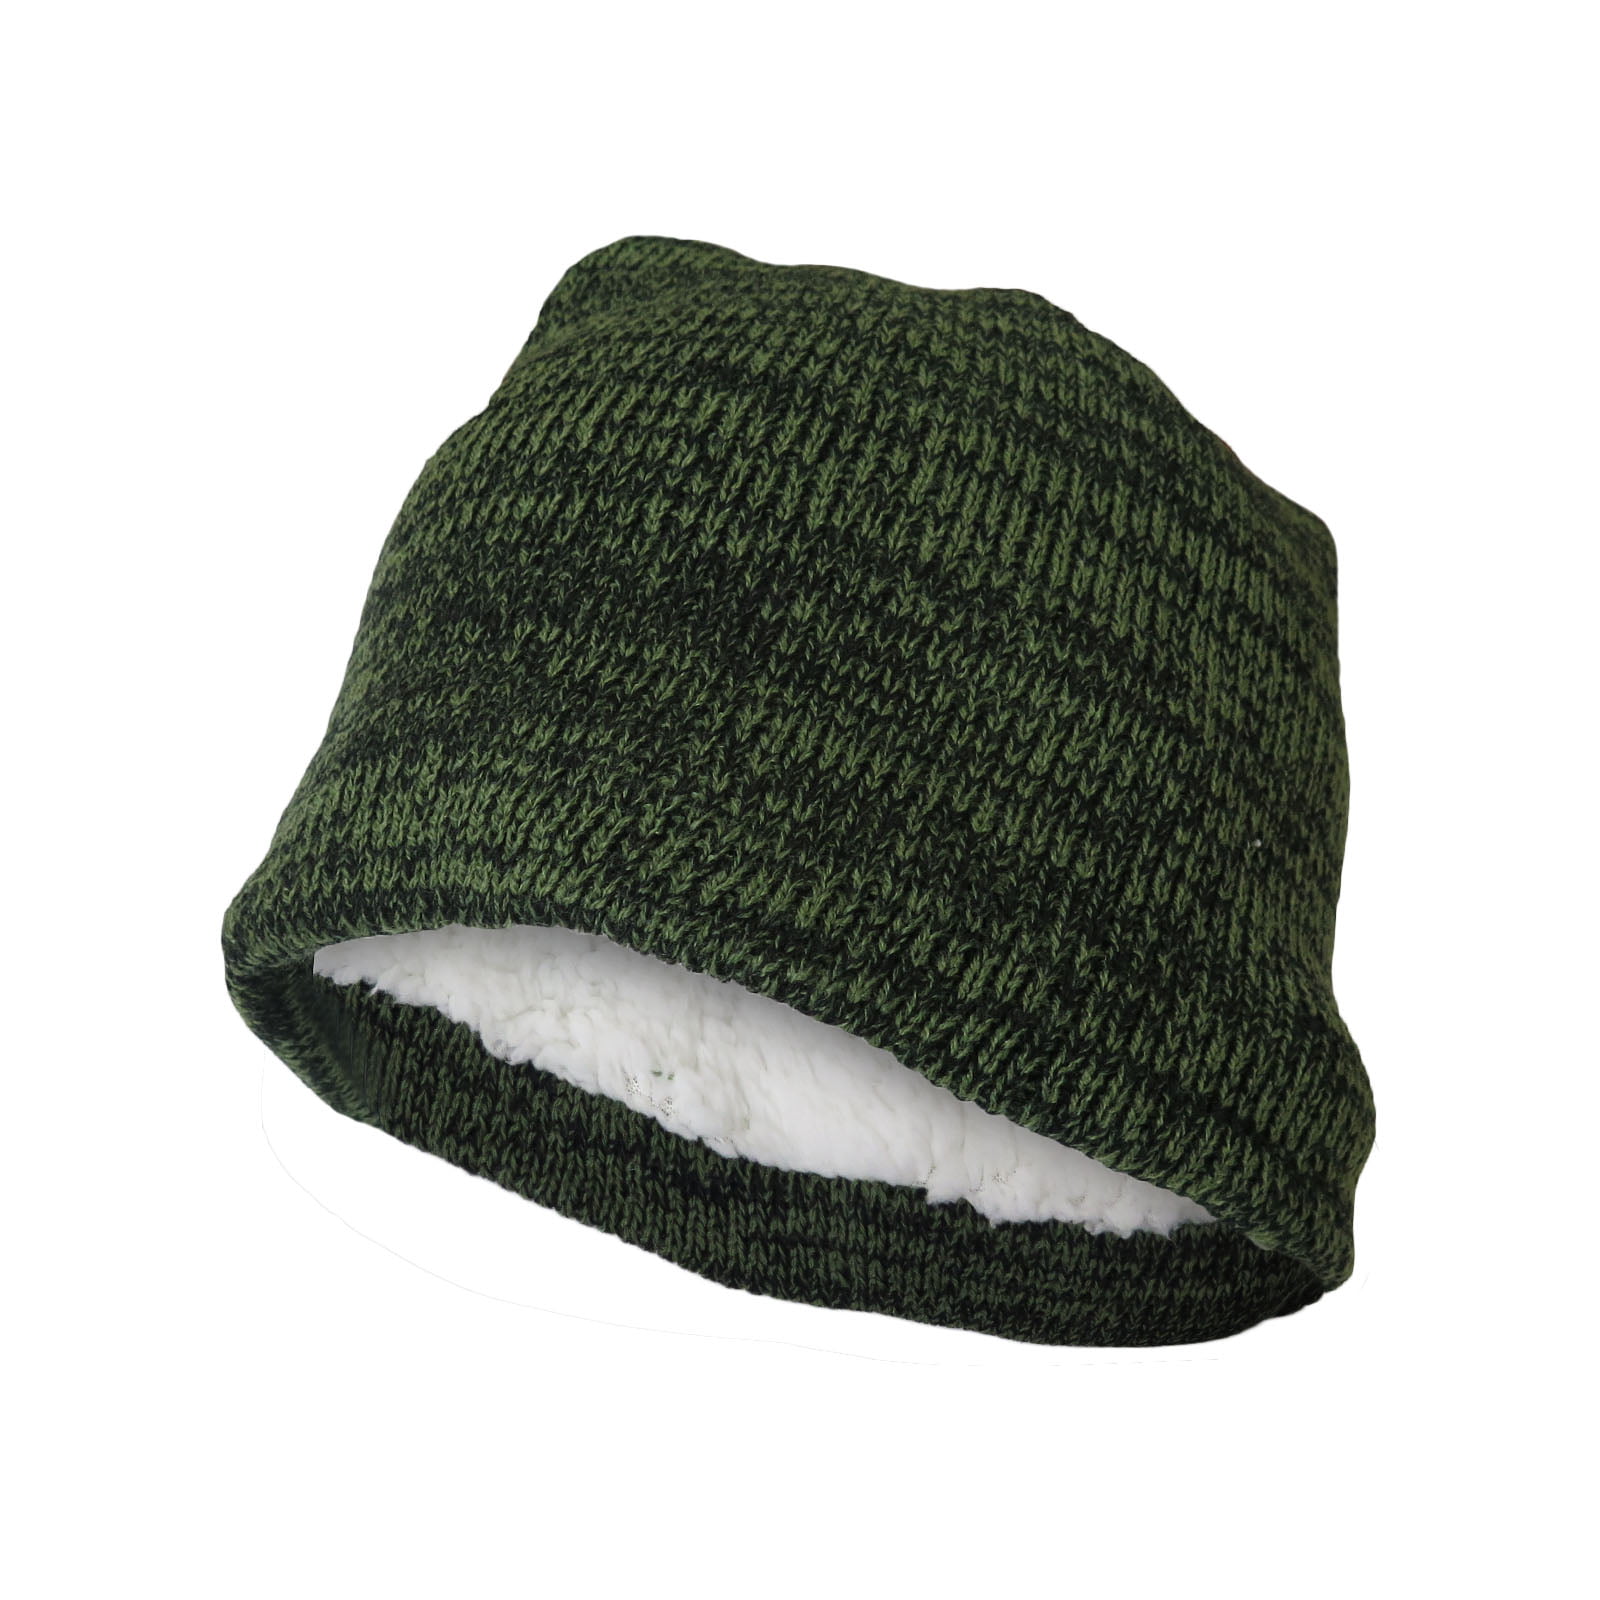 Fashion Kiss Band Skull Cap Beanie Hat Warm Winter Hat for Men and Women